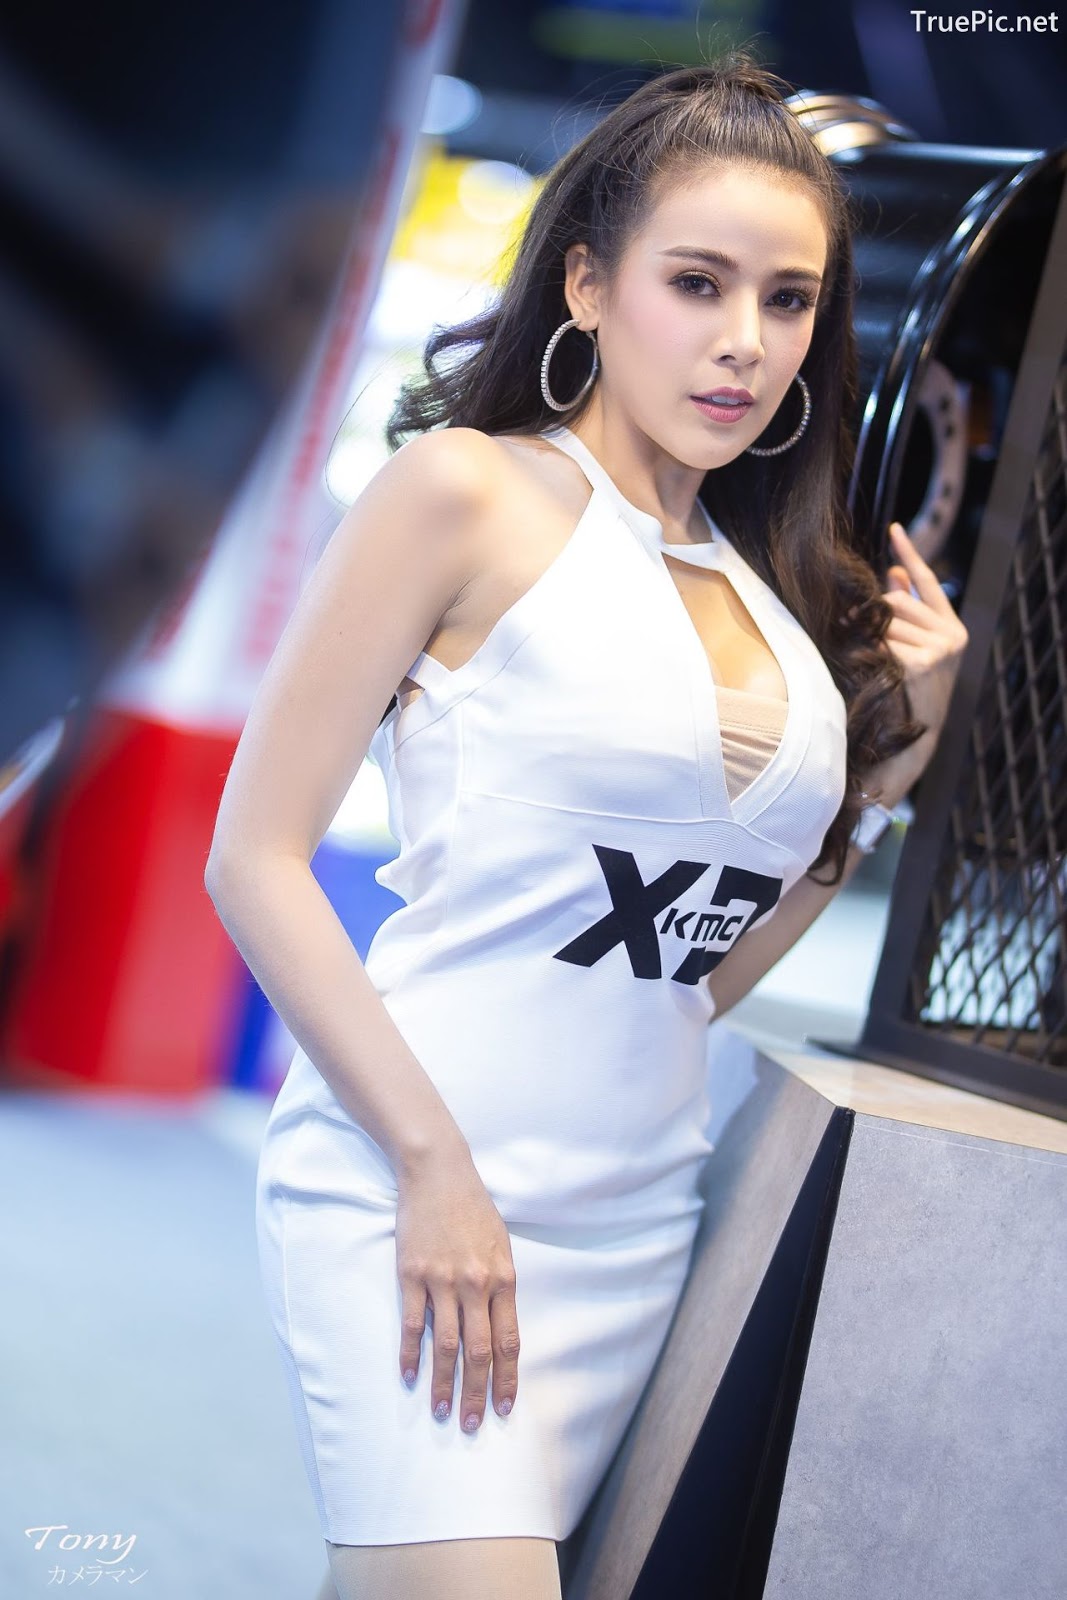 Image-Thailand-Hot-Model-Thai-Racing-Girl-At-Motor-Expo-2018-TruePic.net- Picture-32